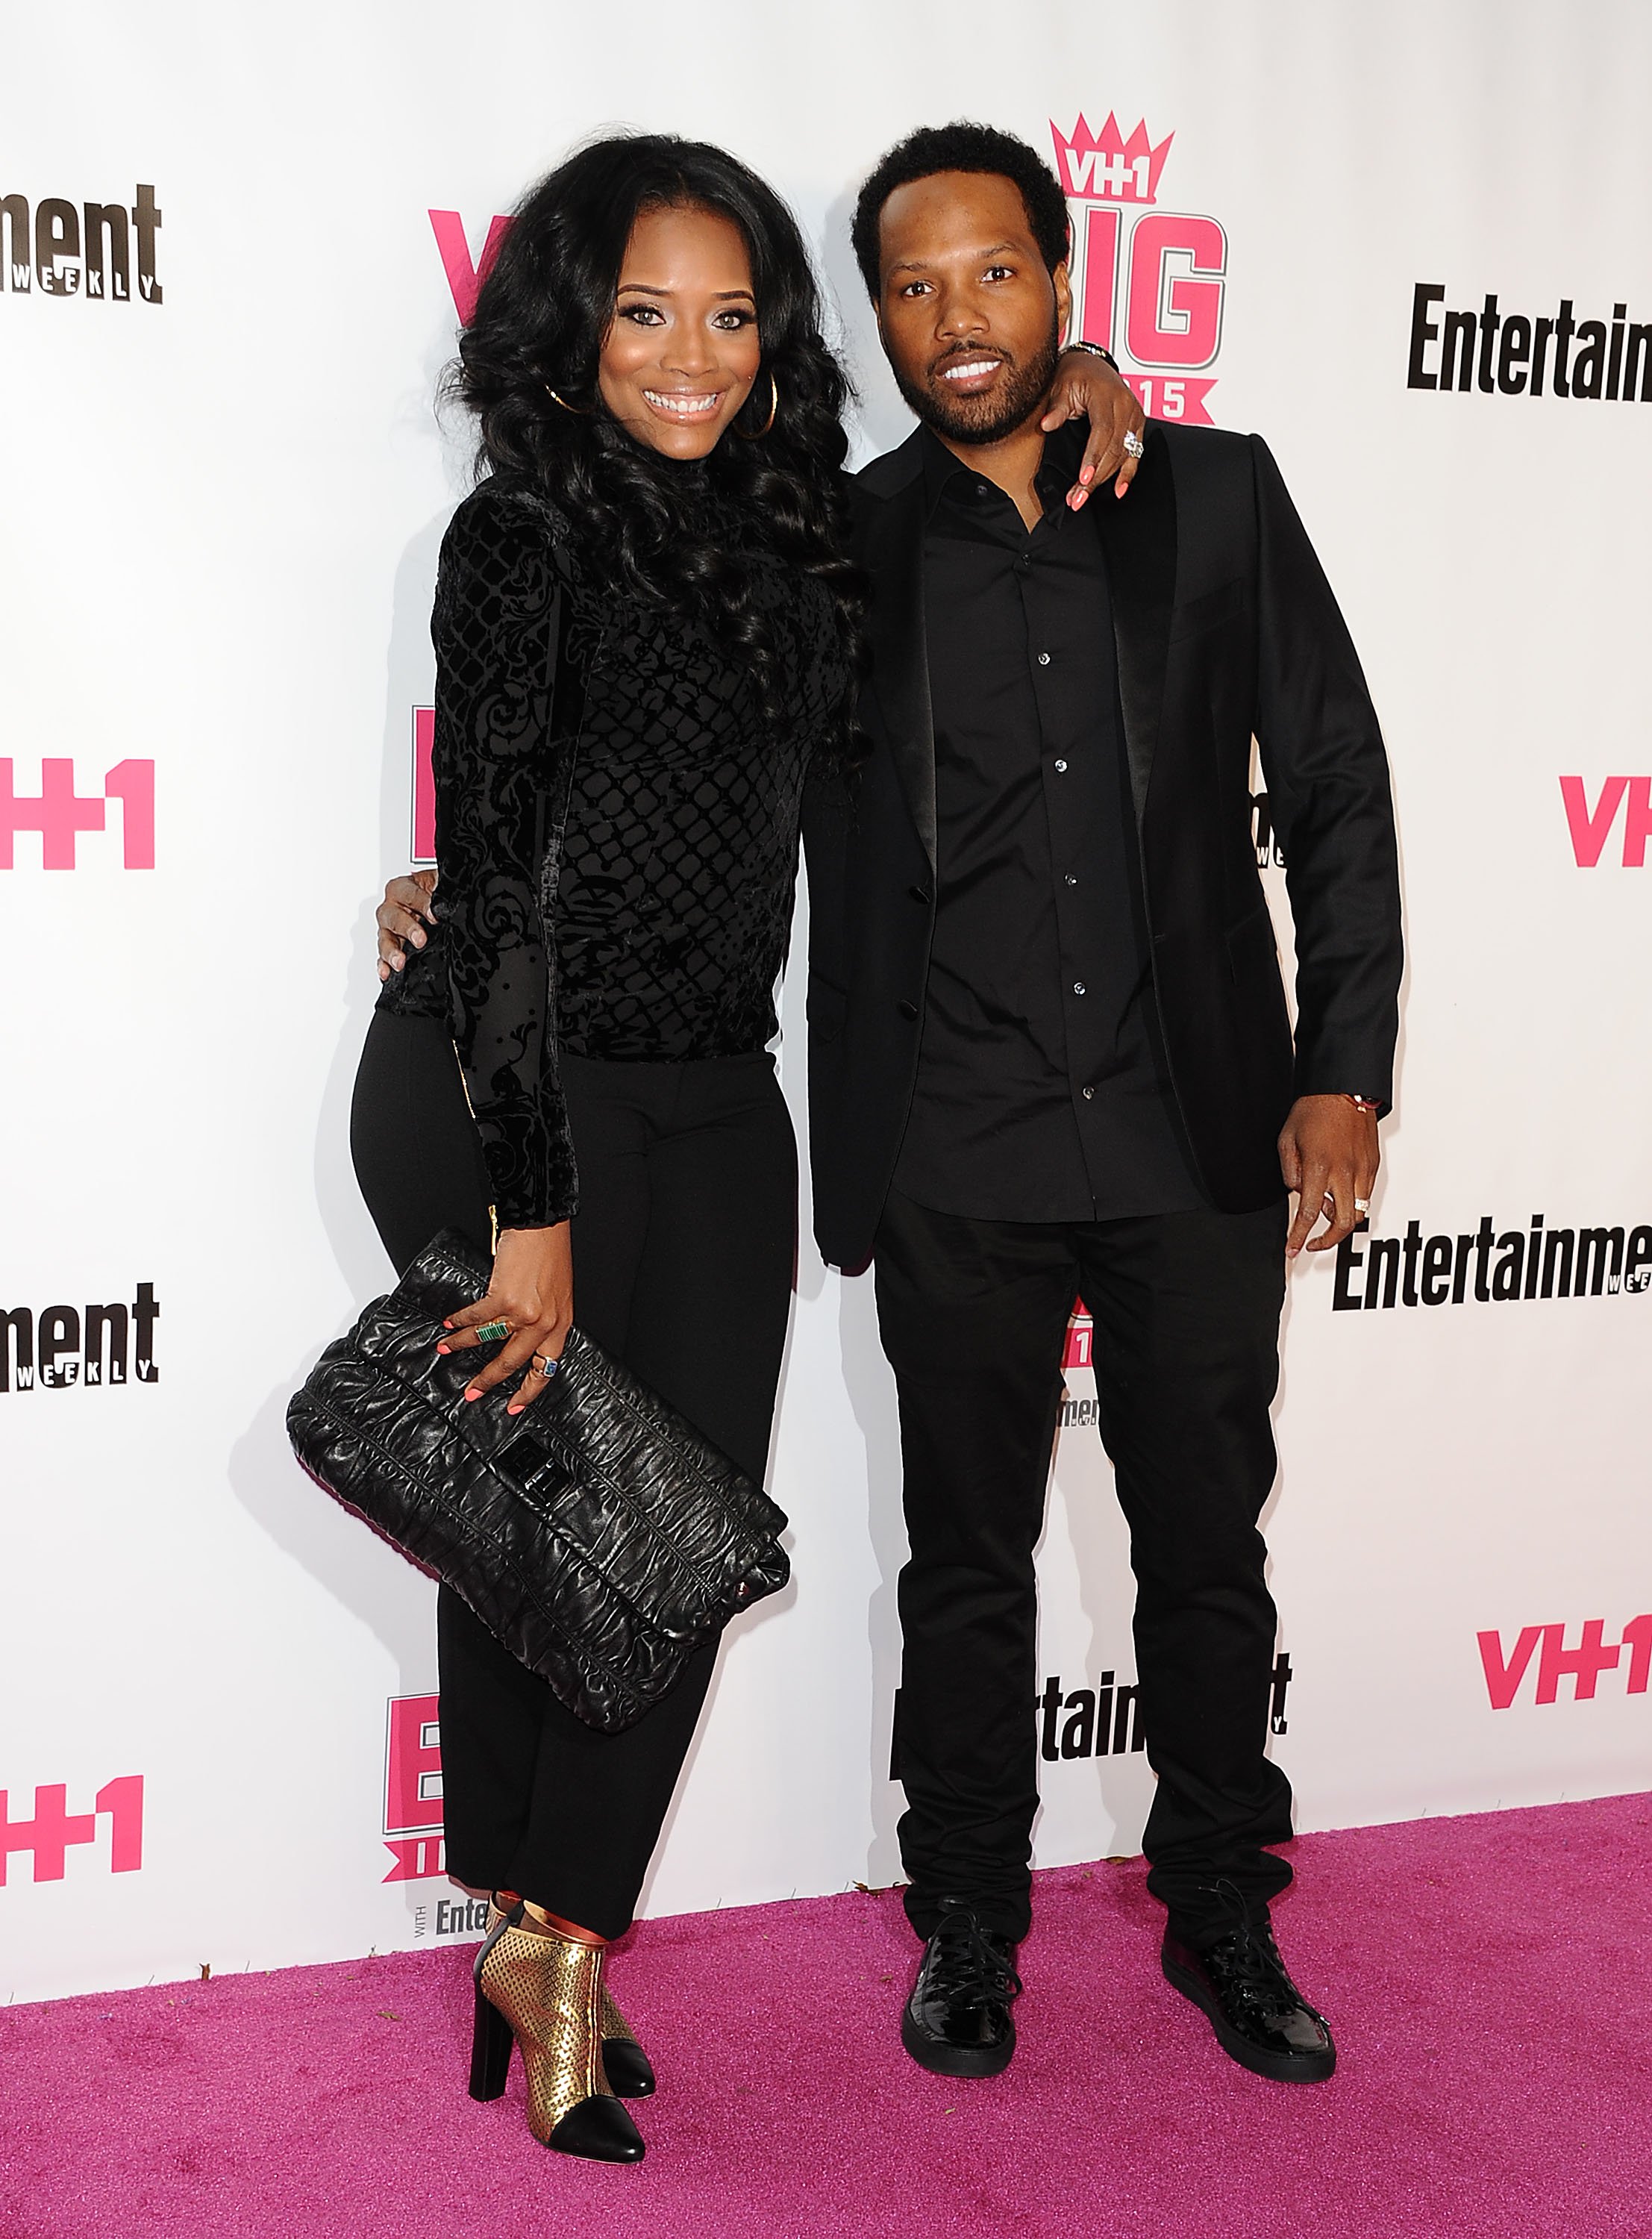 Yandy Smith Harris and Mendeecees Harris at the VH1 Big In 2015 with Entertainment Weekly Awards on Nov. 15, 2015 in California | Photo: Getty Images